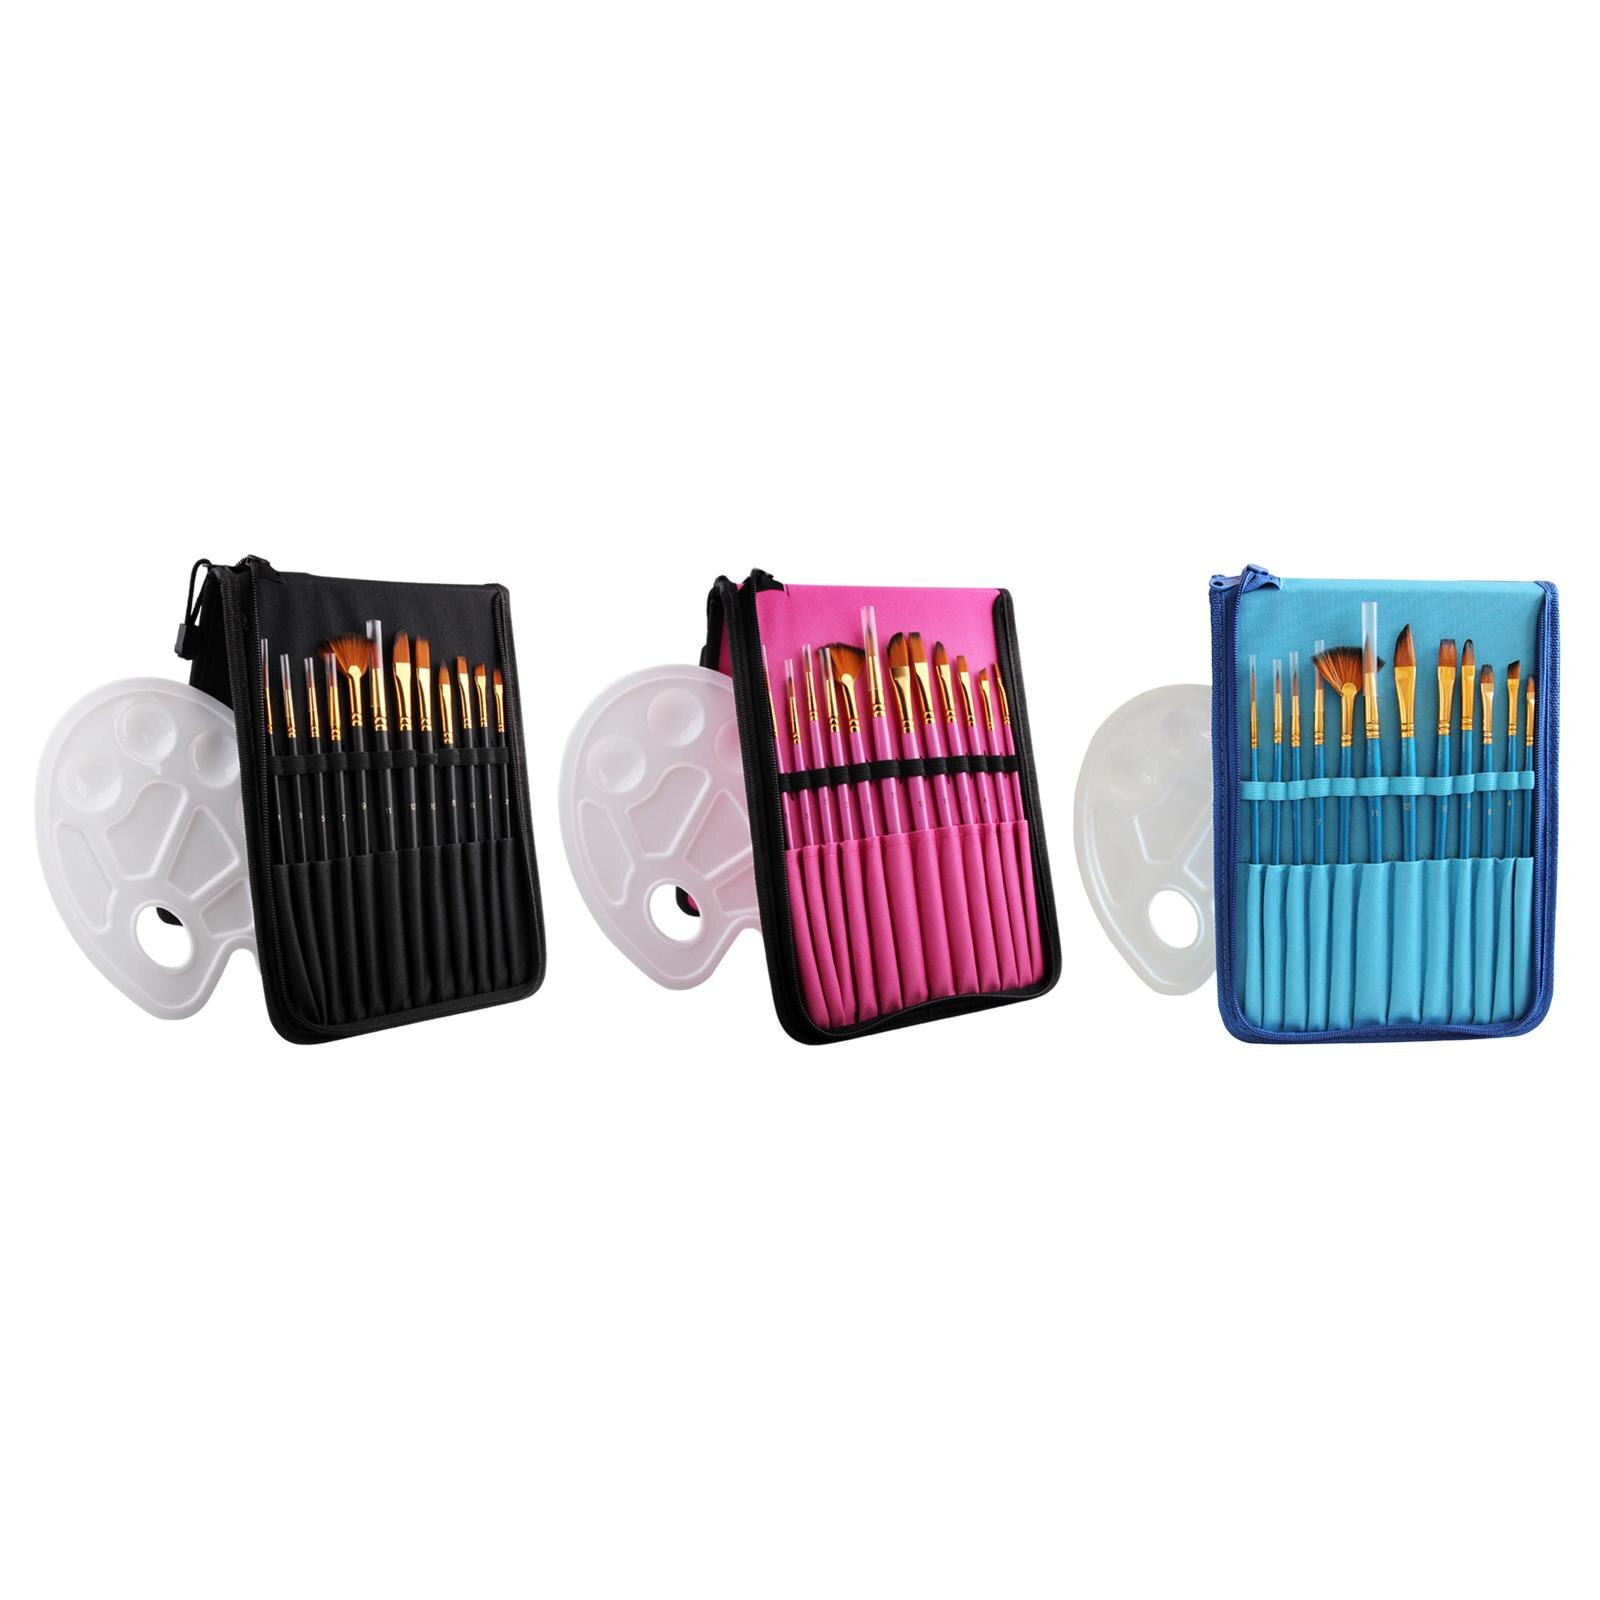 Paint Brush Set W/Carry Case with 12 Brushes Detailing Art for Drawing Acrylic Paint Oil Tempera Face Nail Art